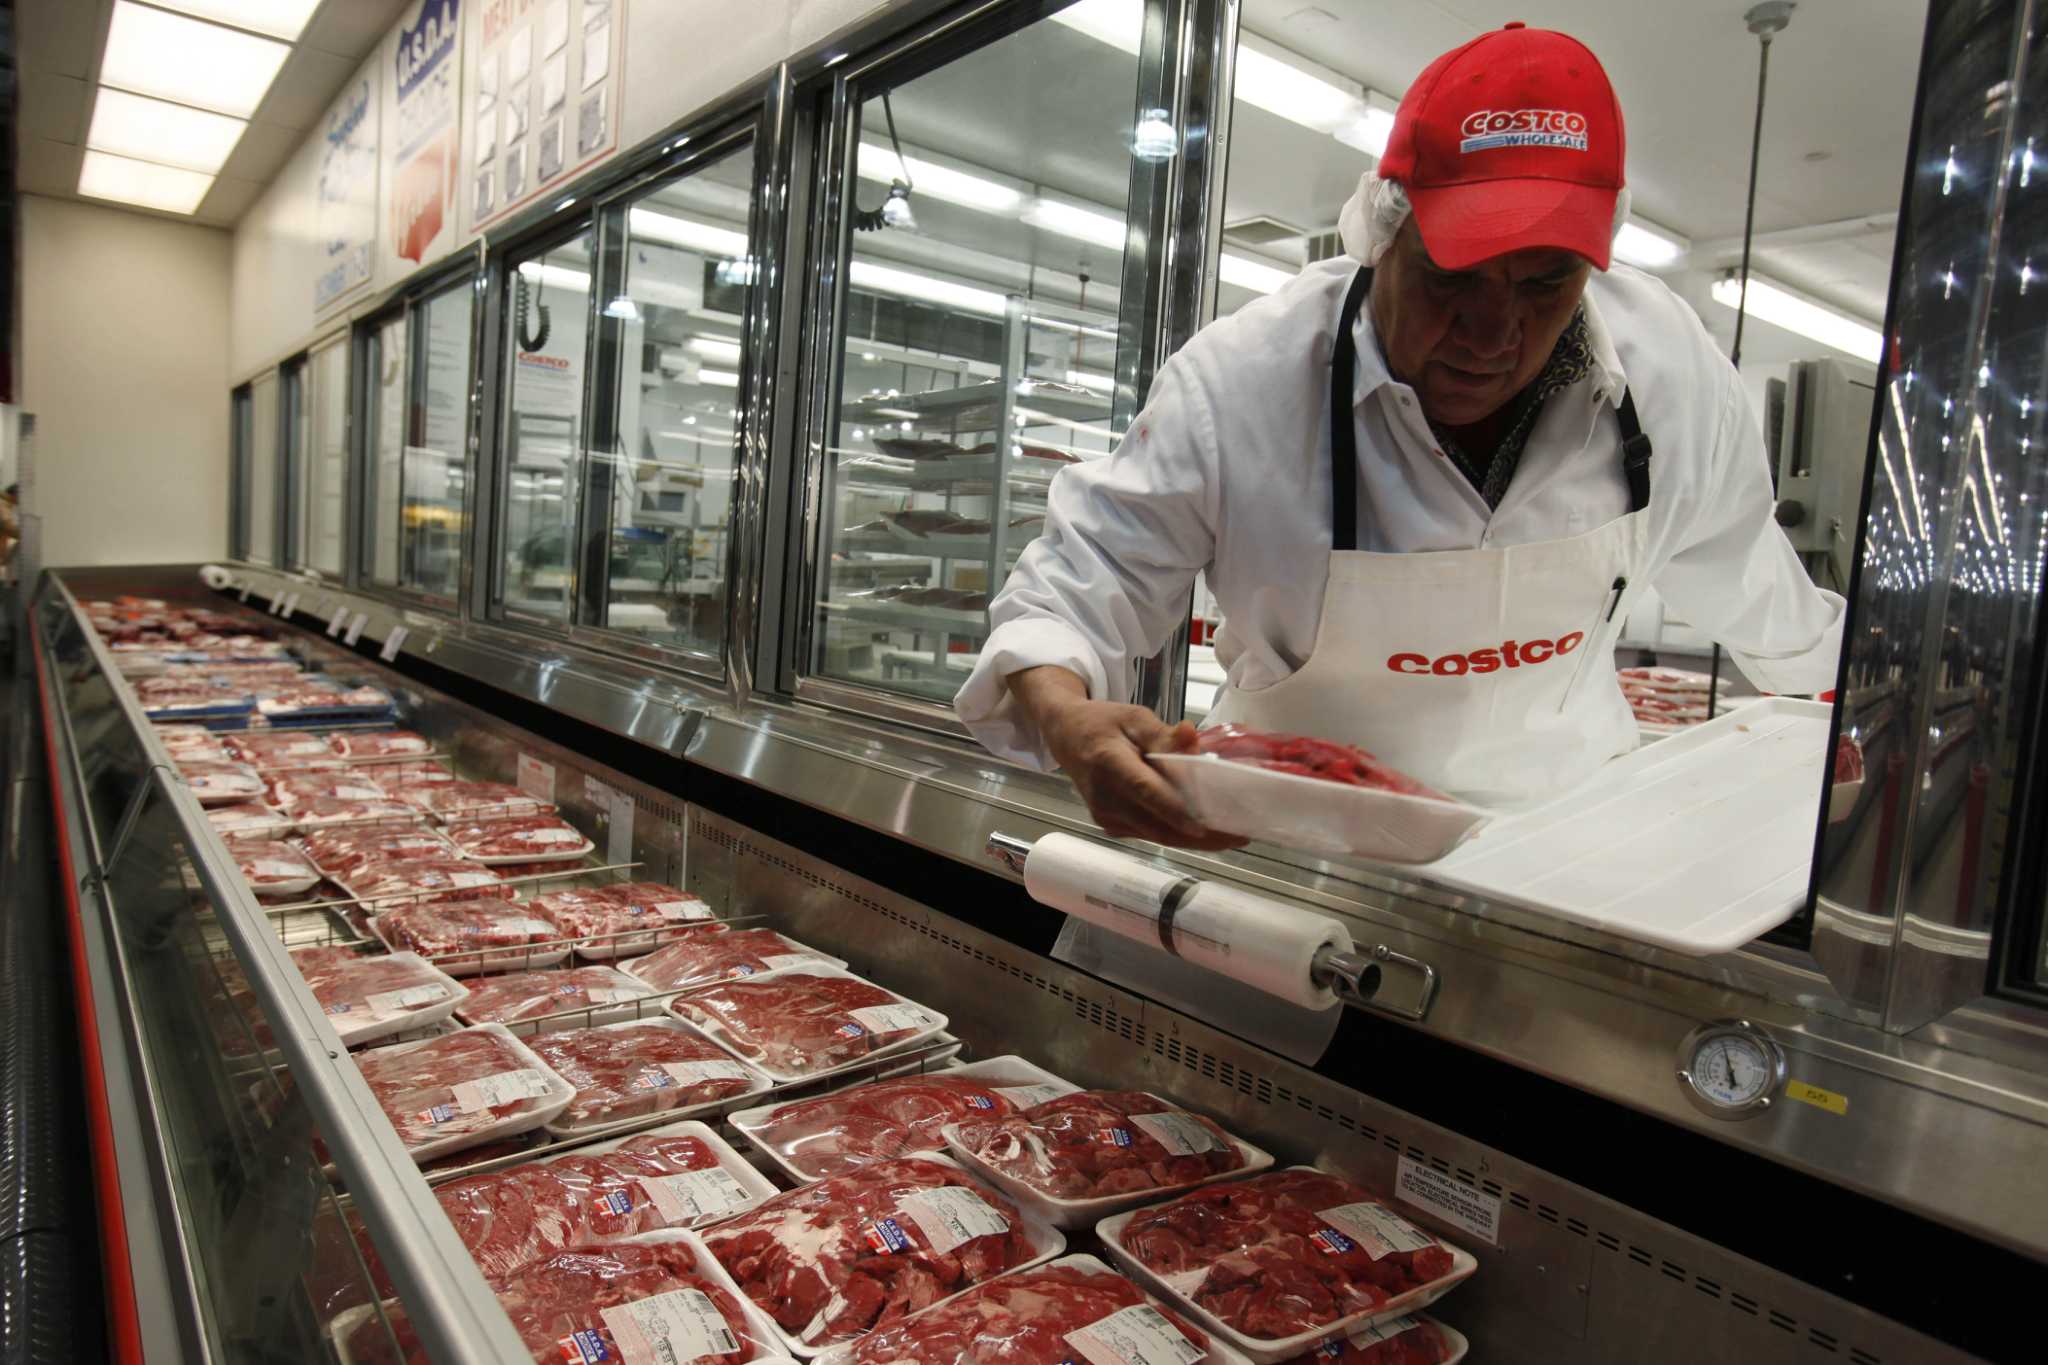 Costco limits fresh meat purchases